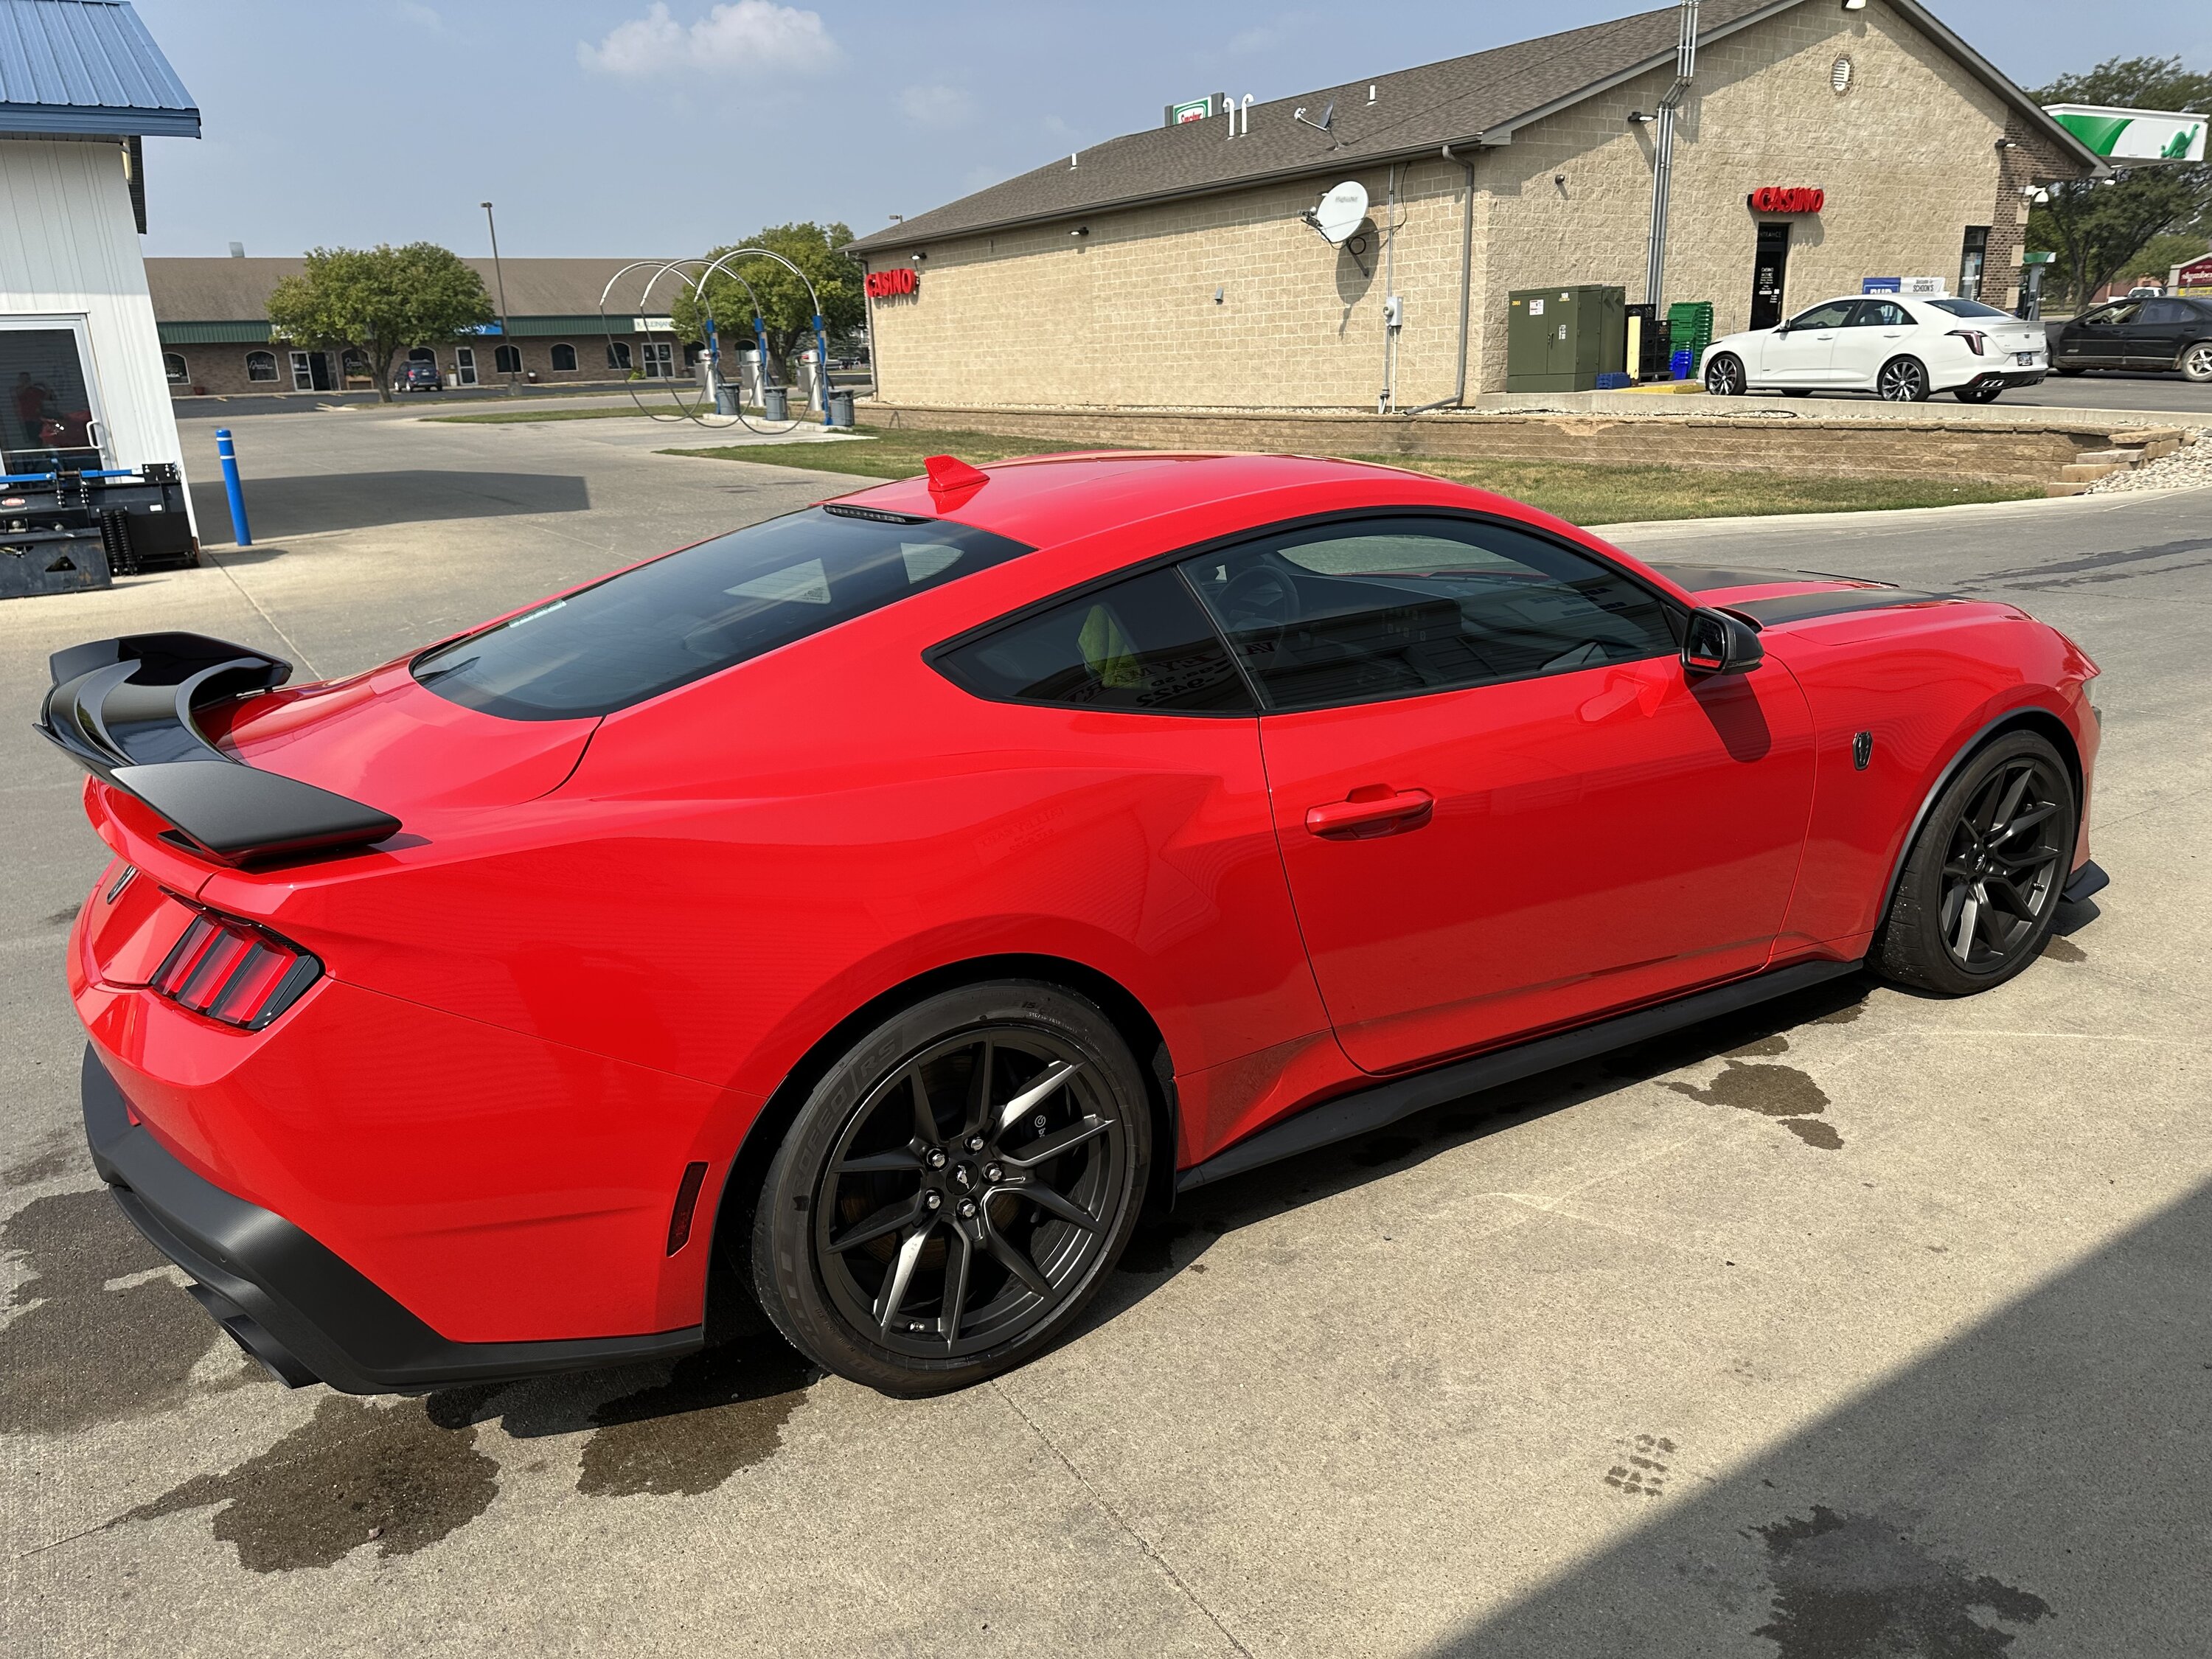 S650 Mustang BUILT & SHIPPED !! Tracker update 2023: What's your status? IMG_1384